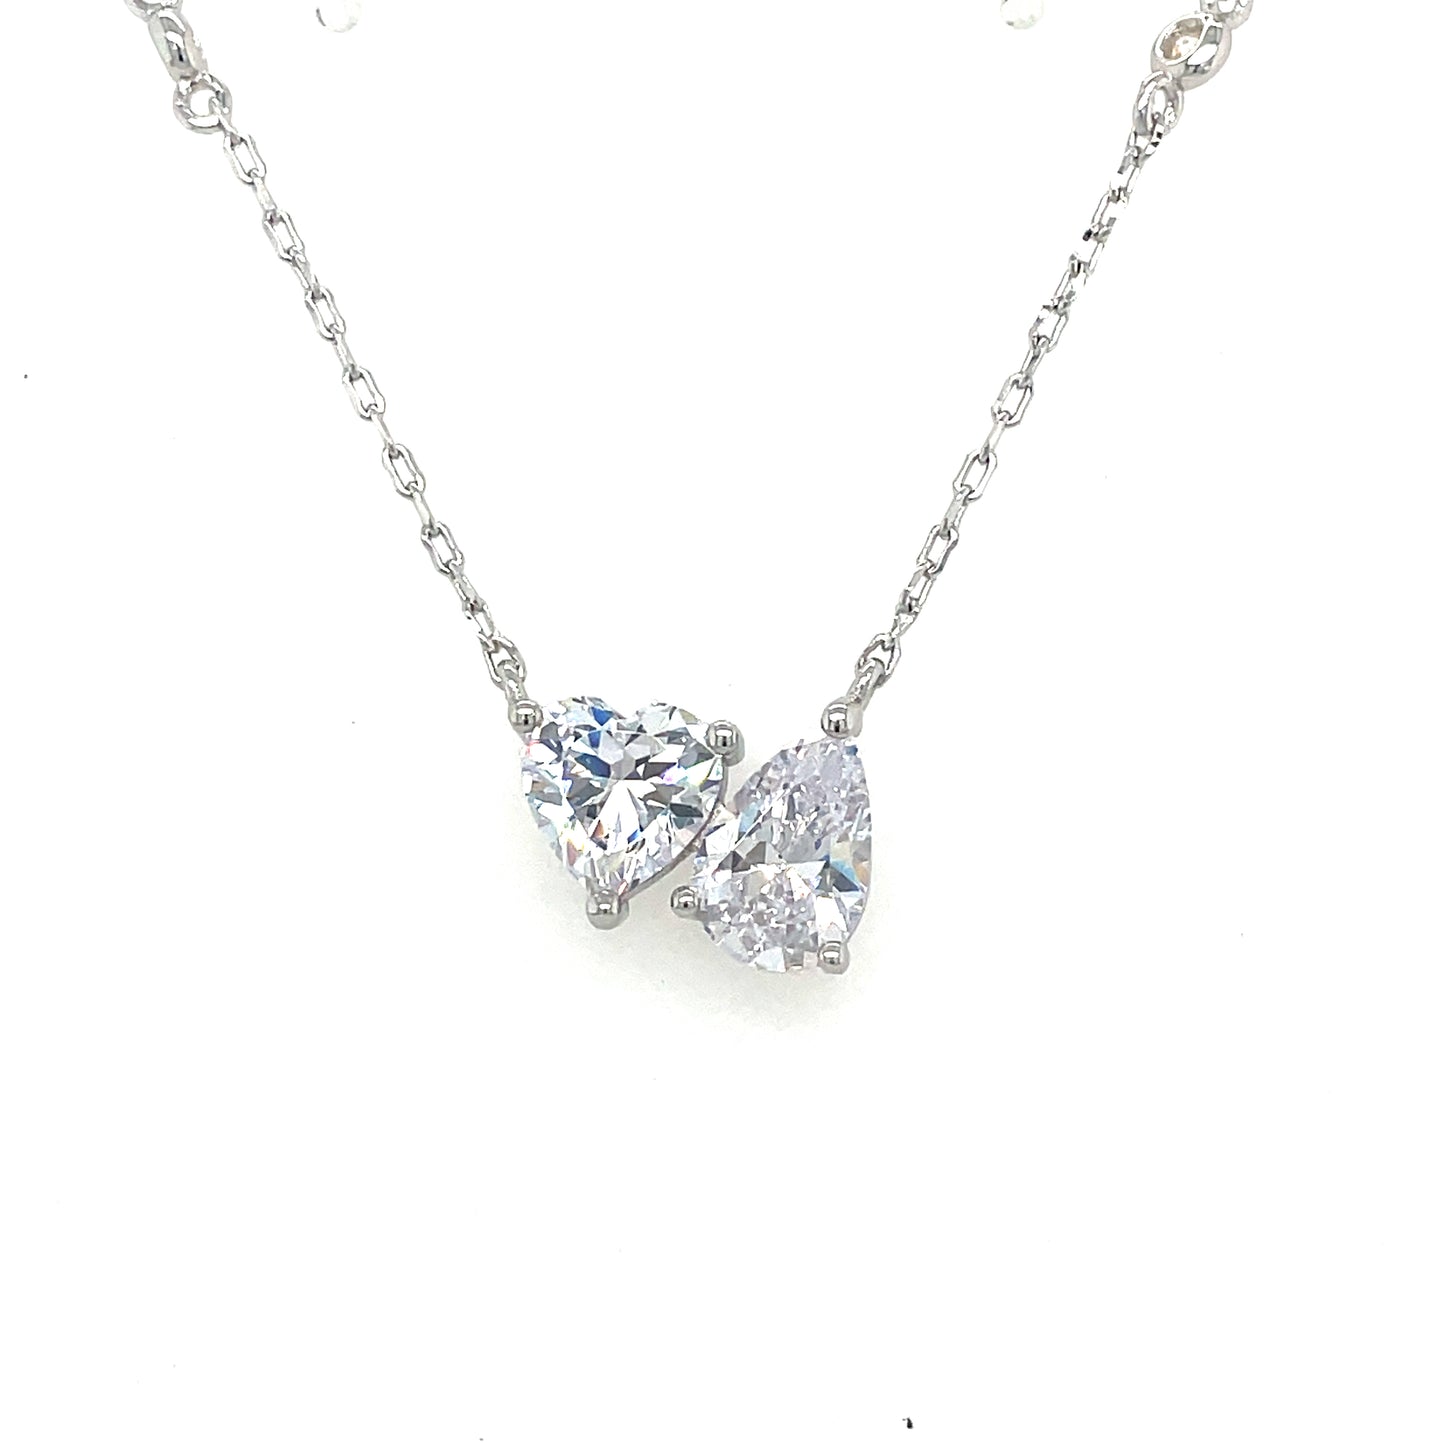 Sterling Silver Cubic Zirconia Pear/Heart Scatter Necklet